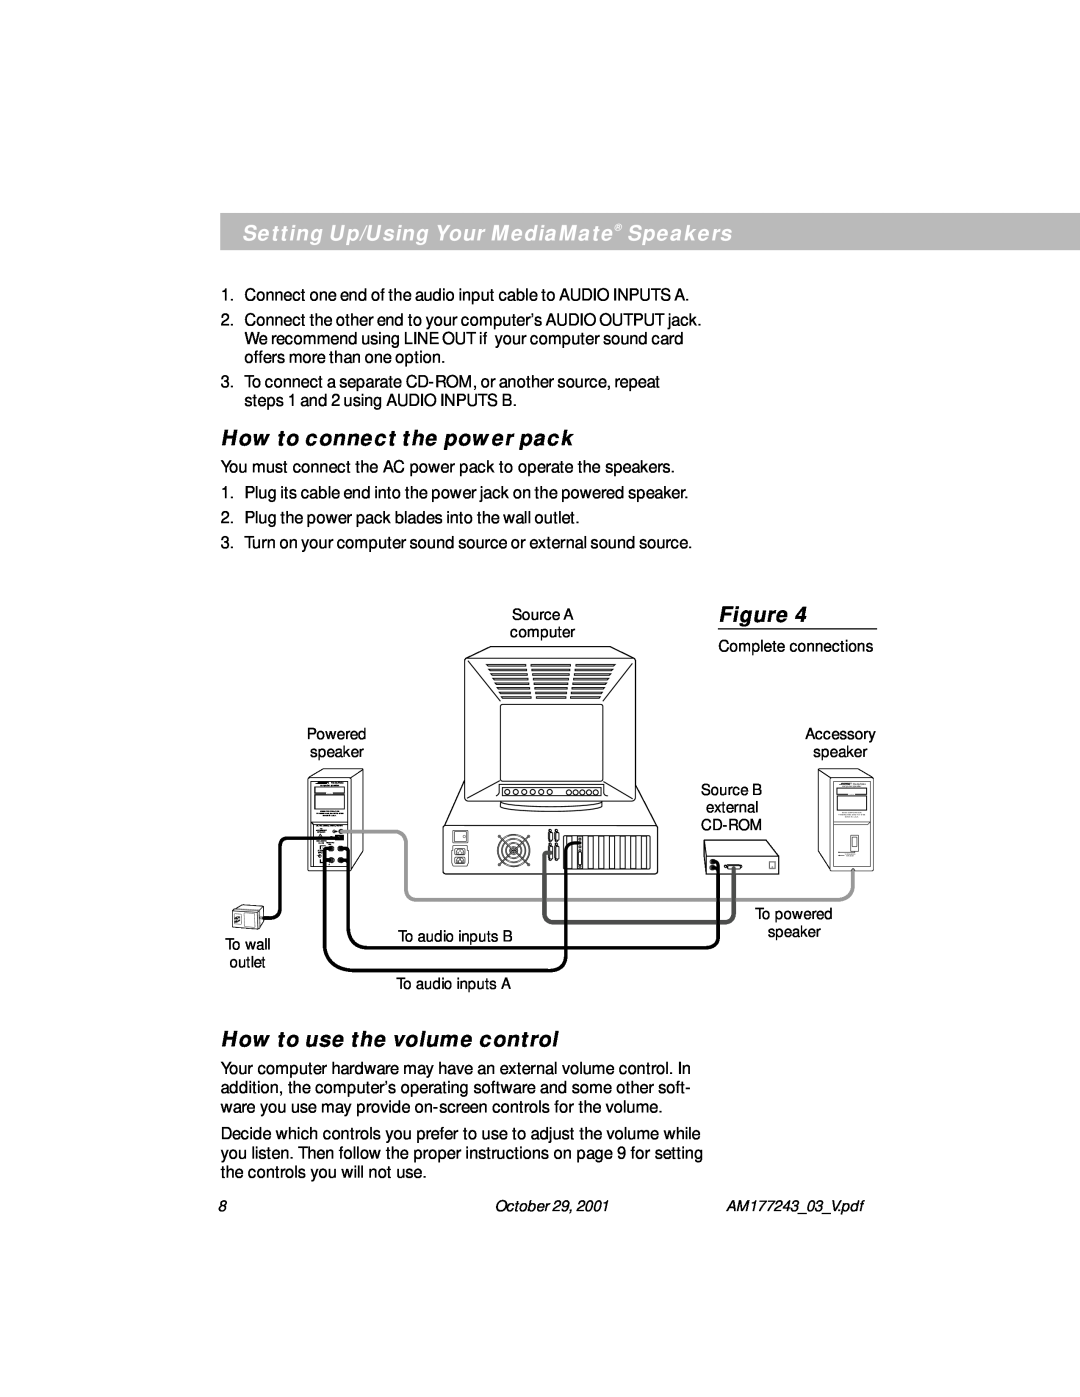 Bose Computer Speakers manual Setting Up/Using Your MediaMate Speakers, How to connect the power pack 